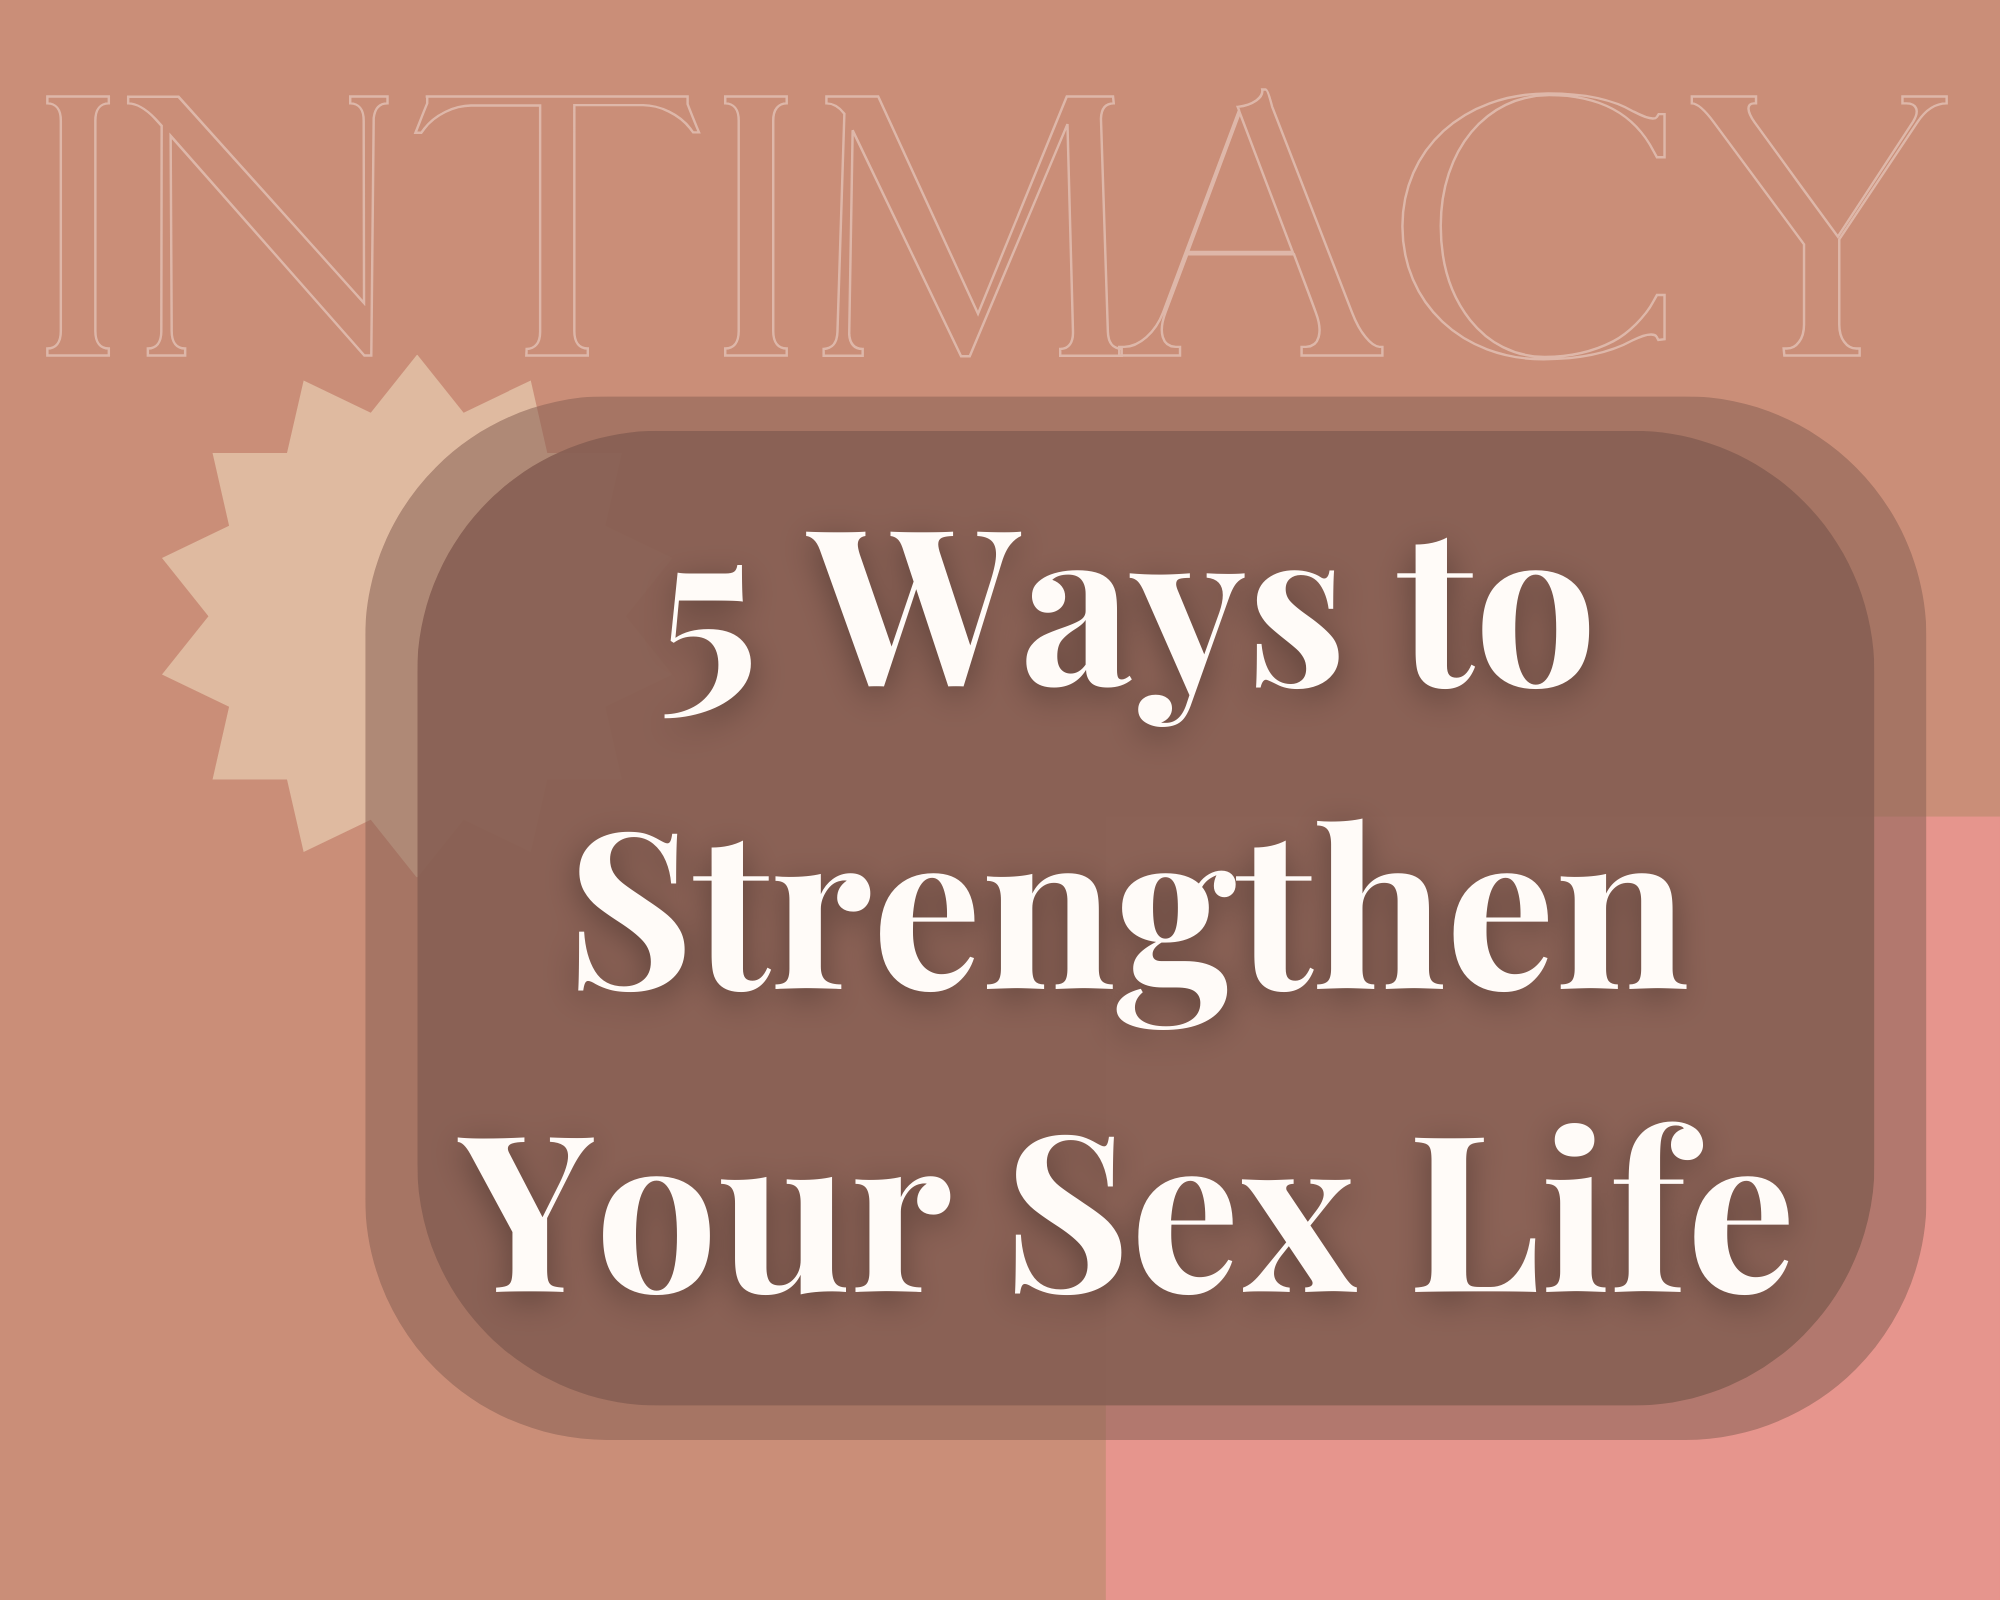 5 ways to strengthen your sex life